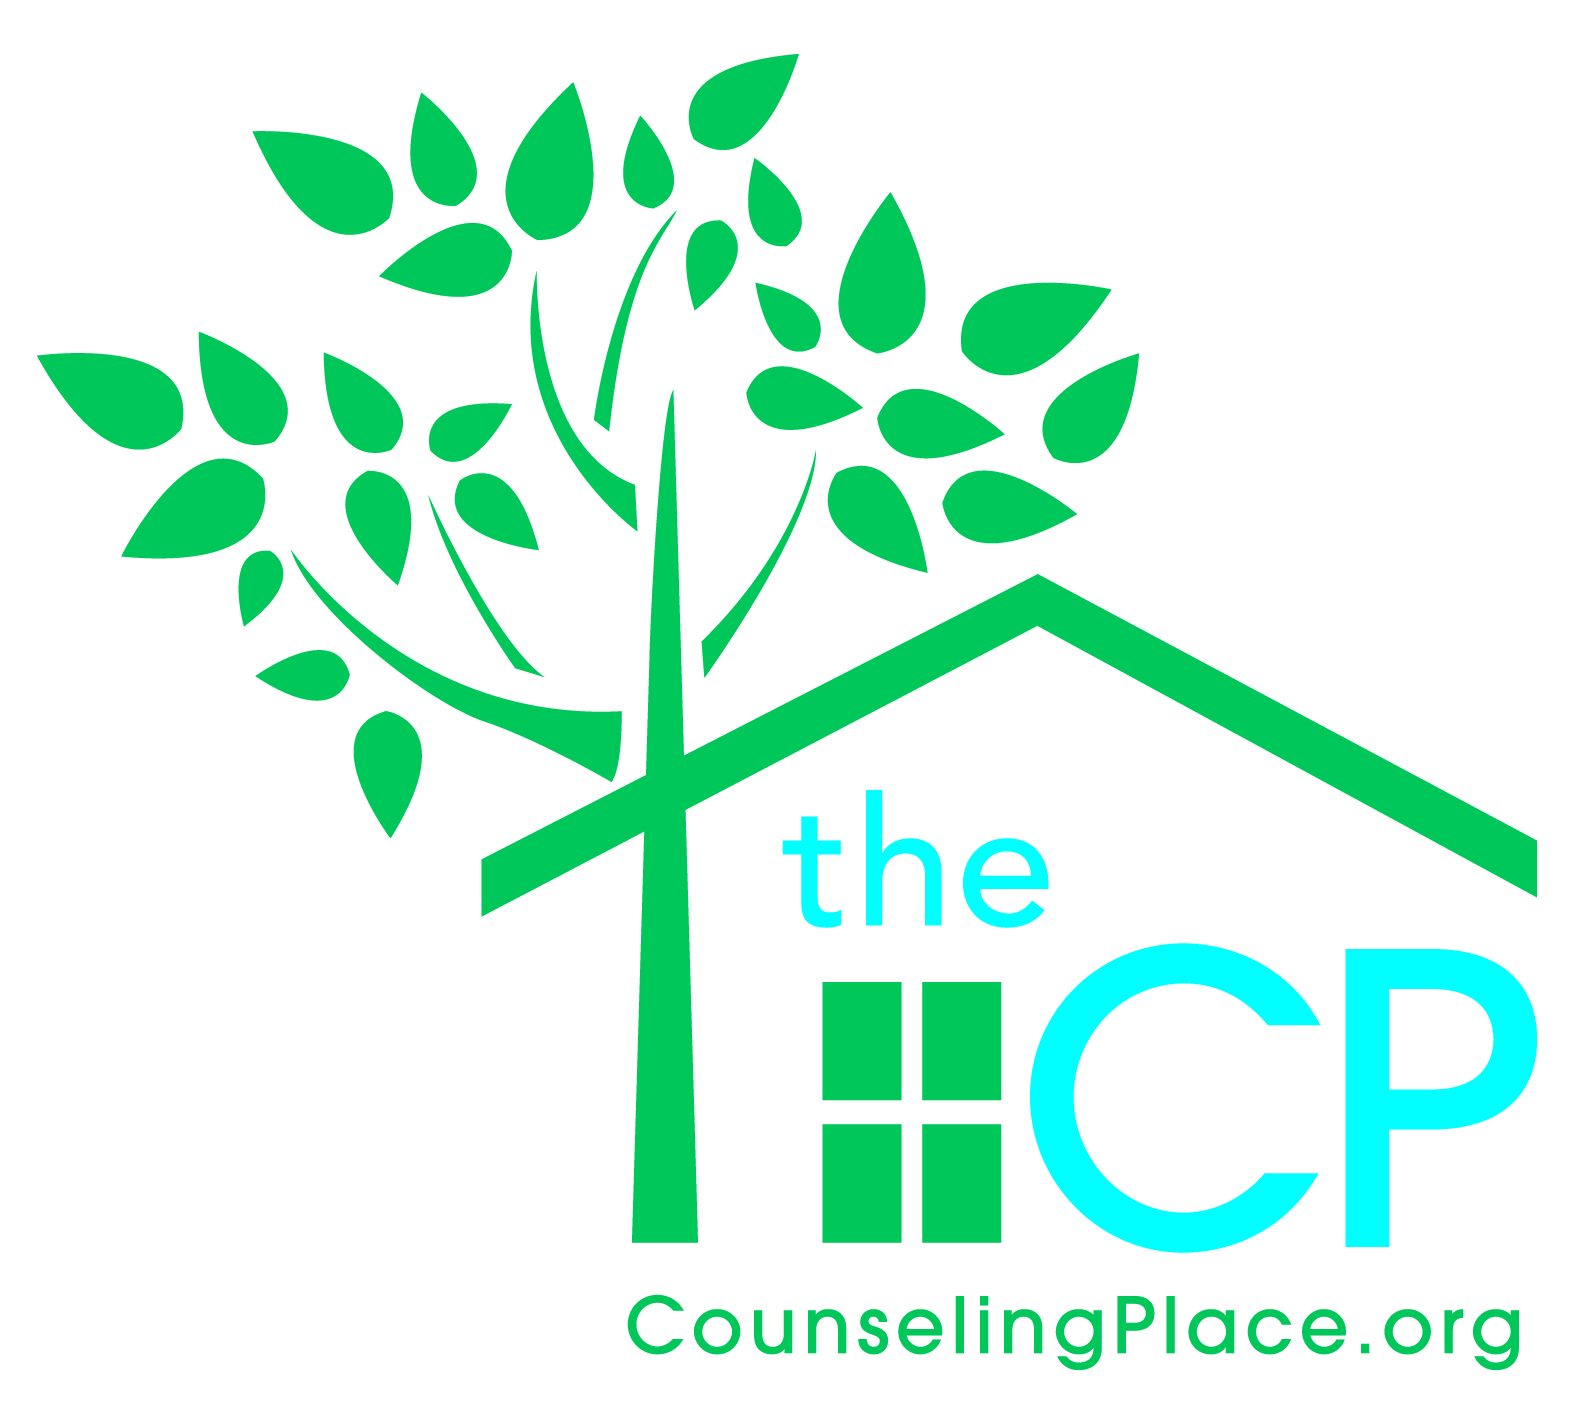 The Counseling Place Logo